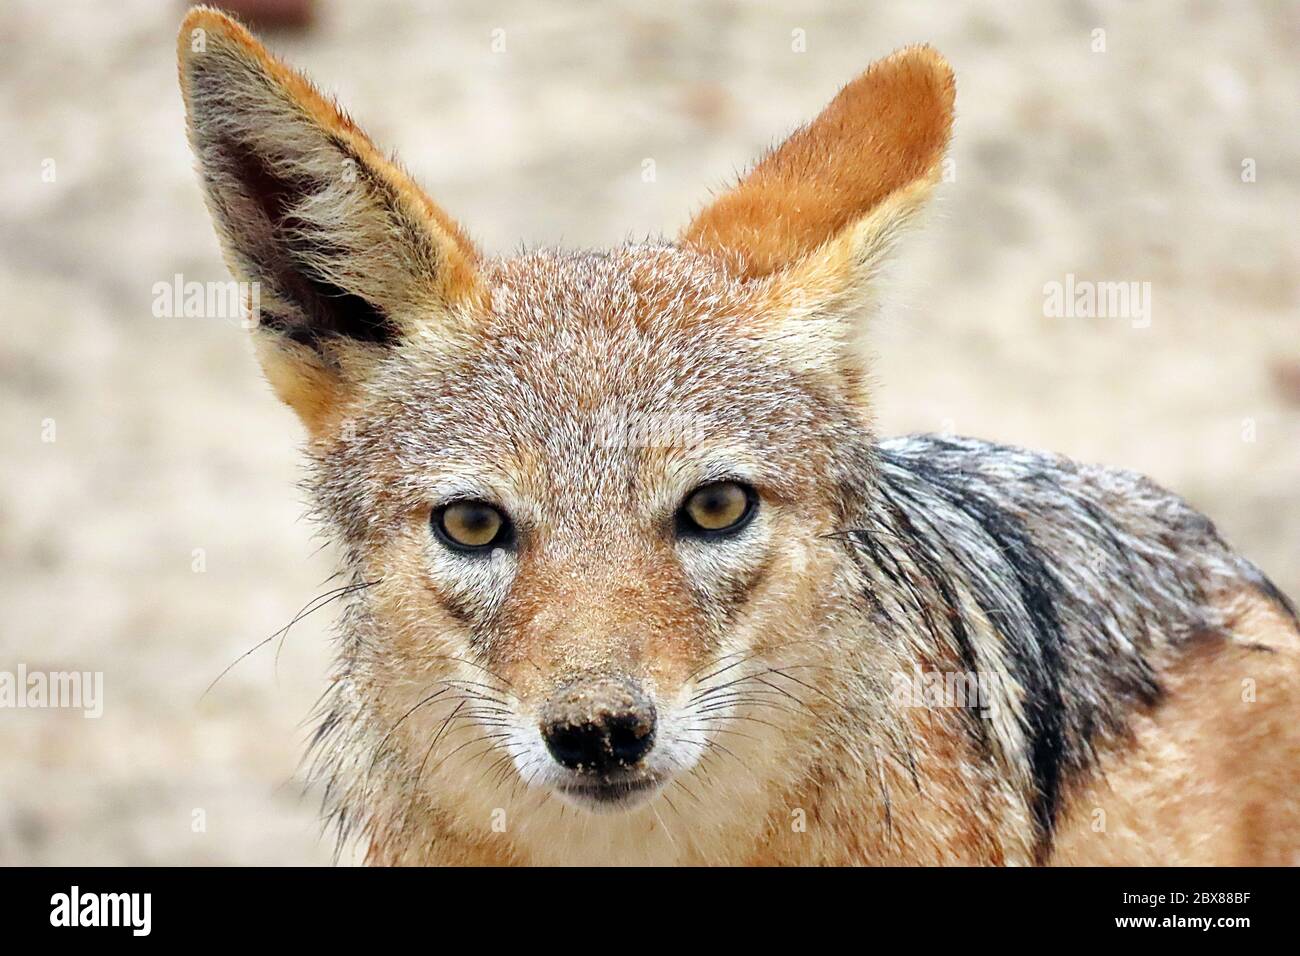 A Black-backed Jackal (Canis mesomelas) looking at the camera at the Cape Cross Seal Reserve on the Skeleton Coast, Namibia. Stock Photo